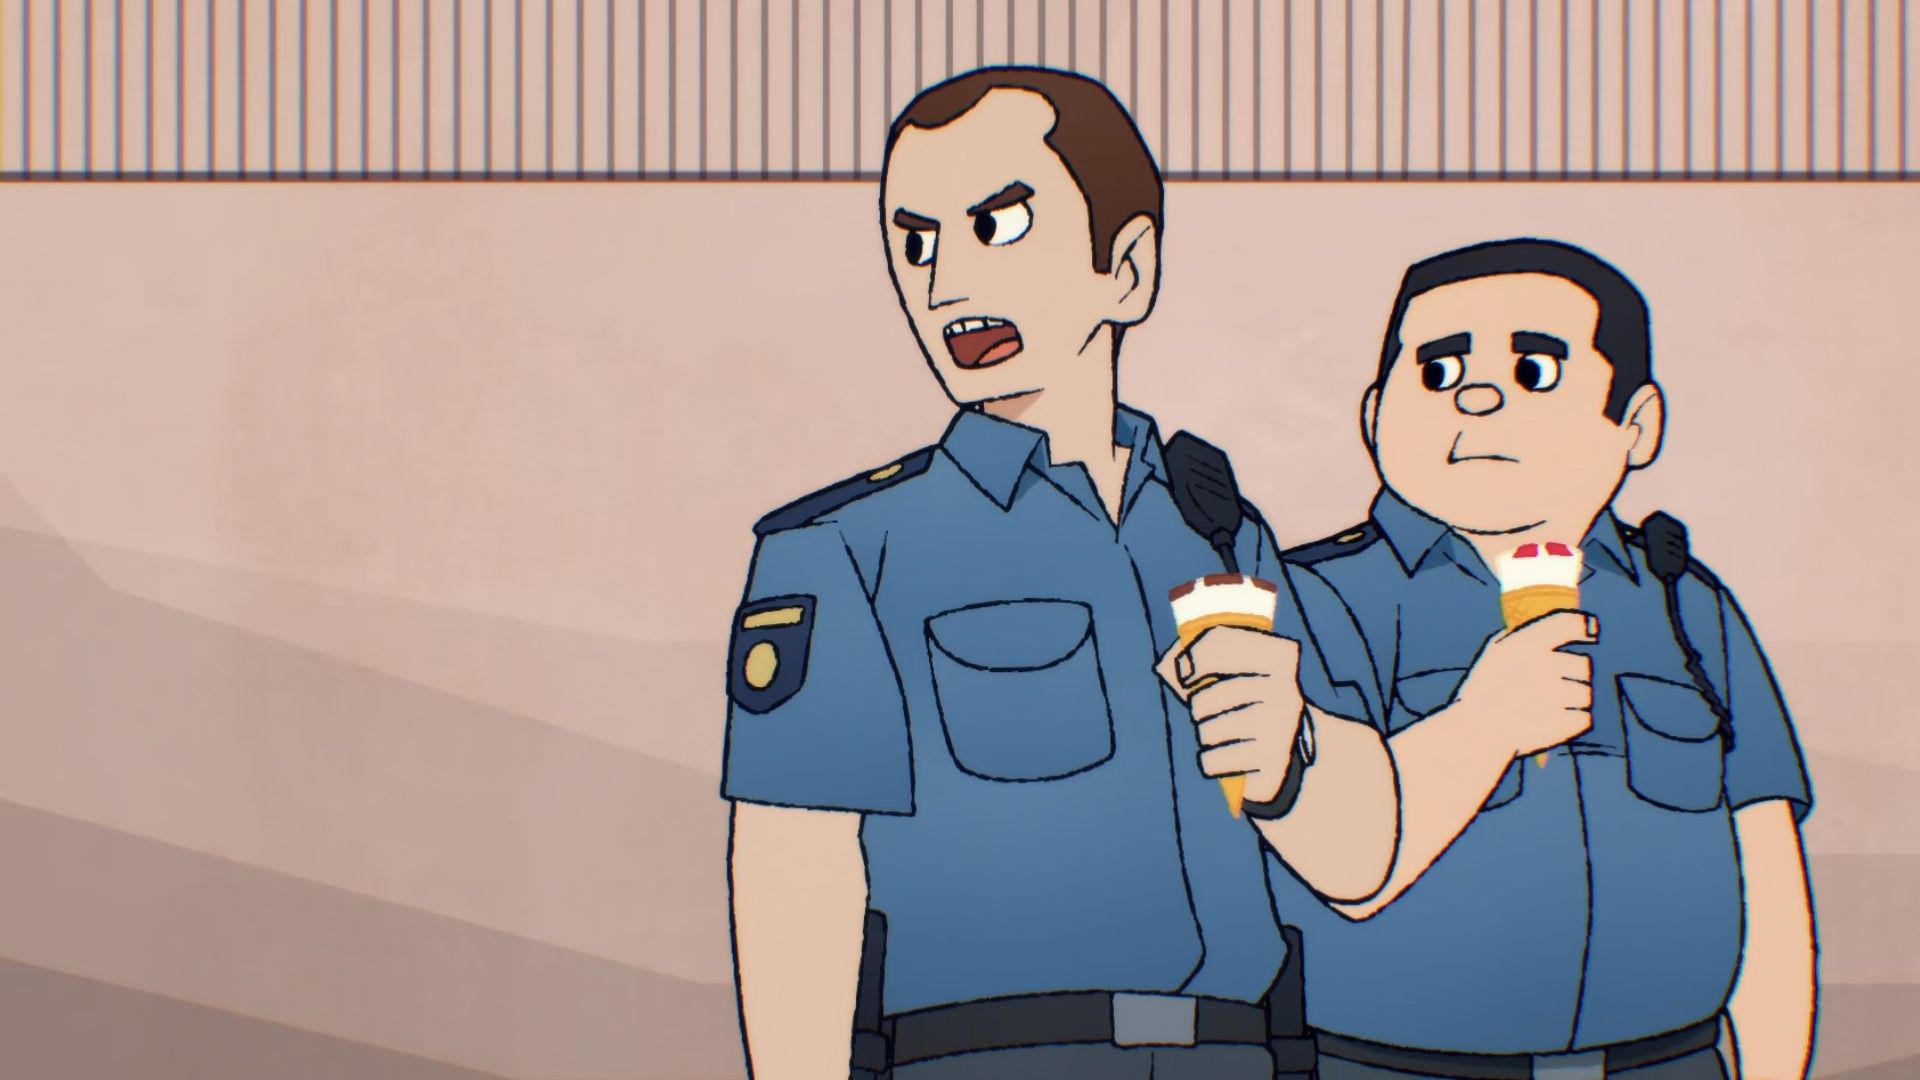 Screenshot from Scott Pilgrim Takes Off shows two security guards holding Cornetto ice cream cones.